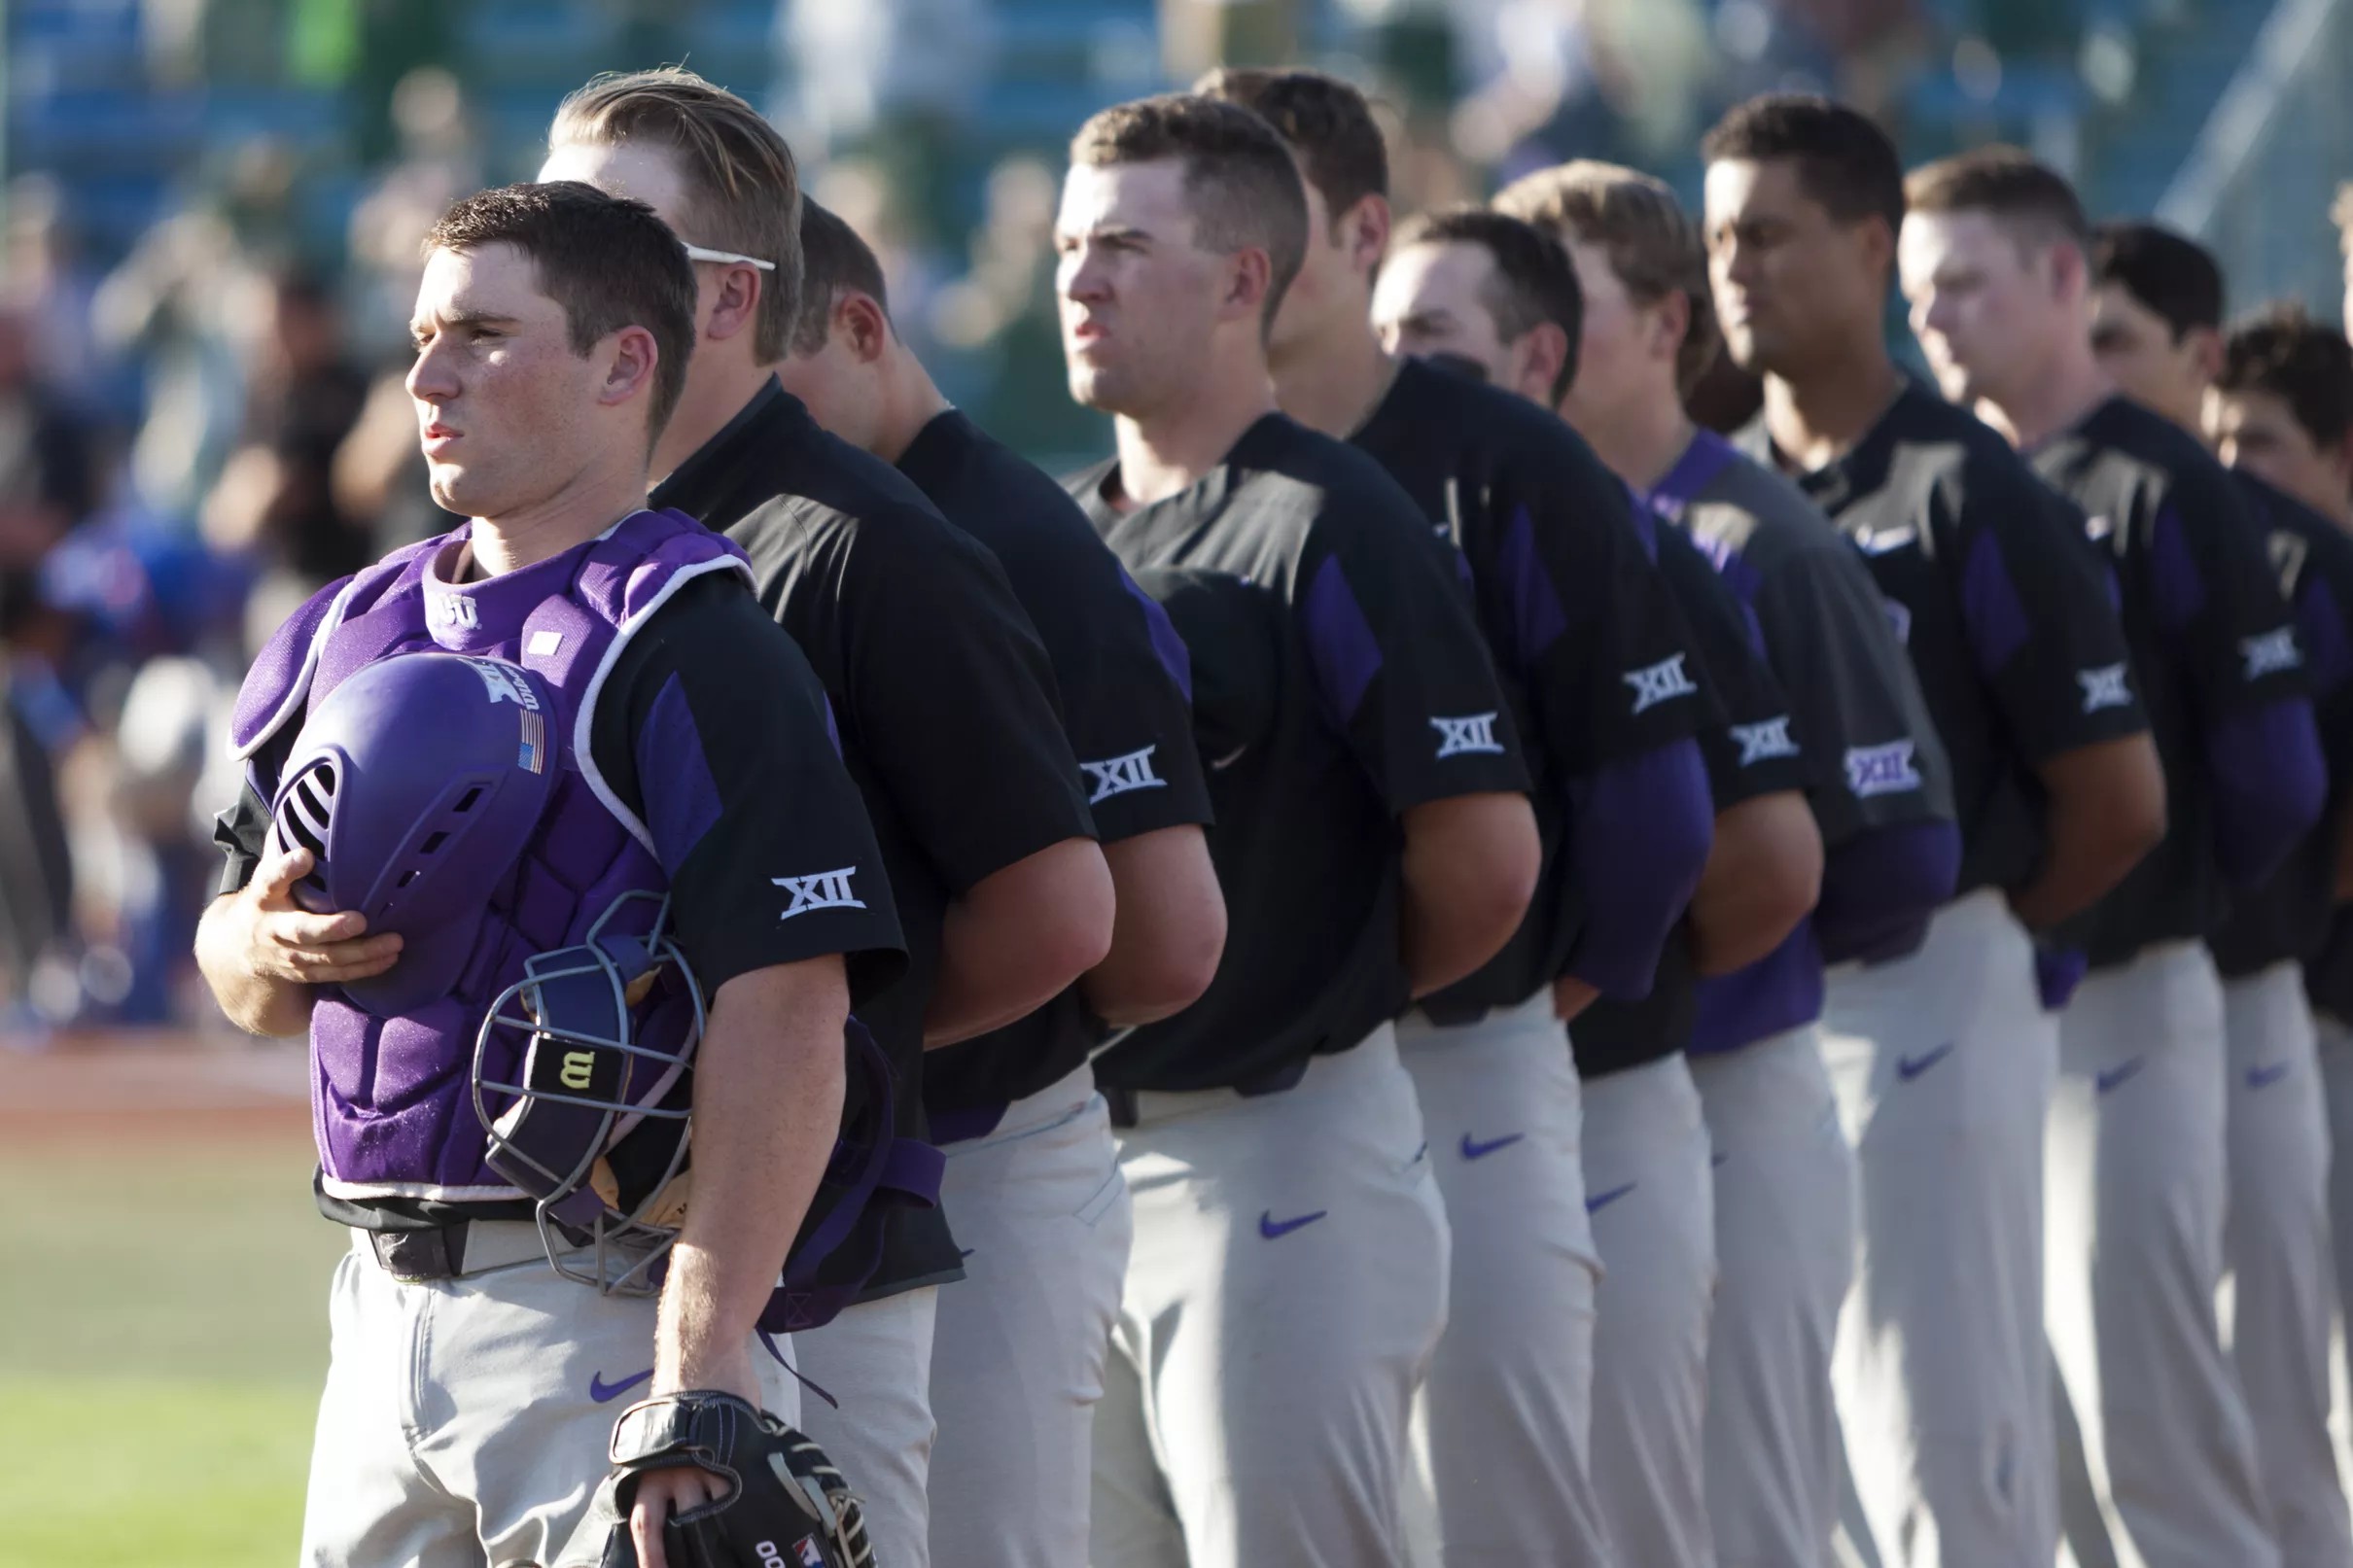 TCU Baseball releases 2019 schedule, featuring two tournaments and a